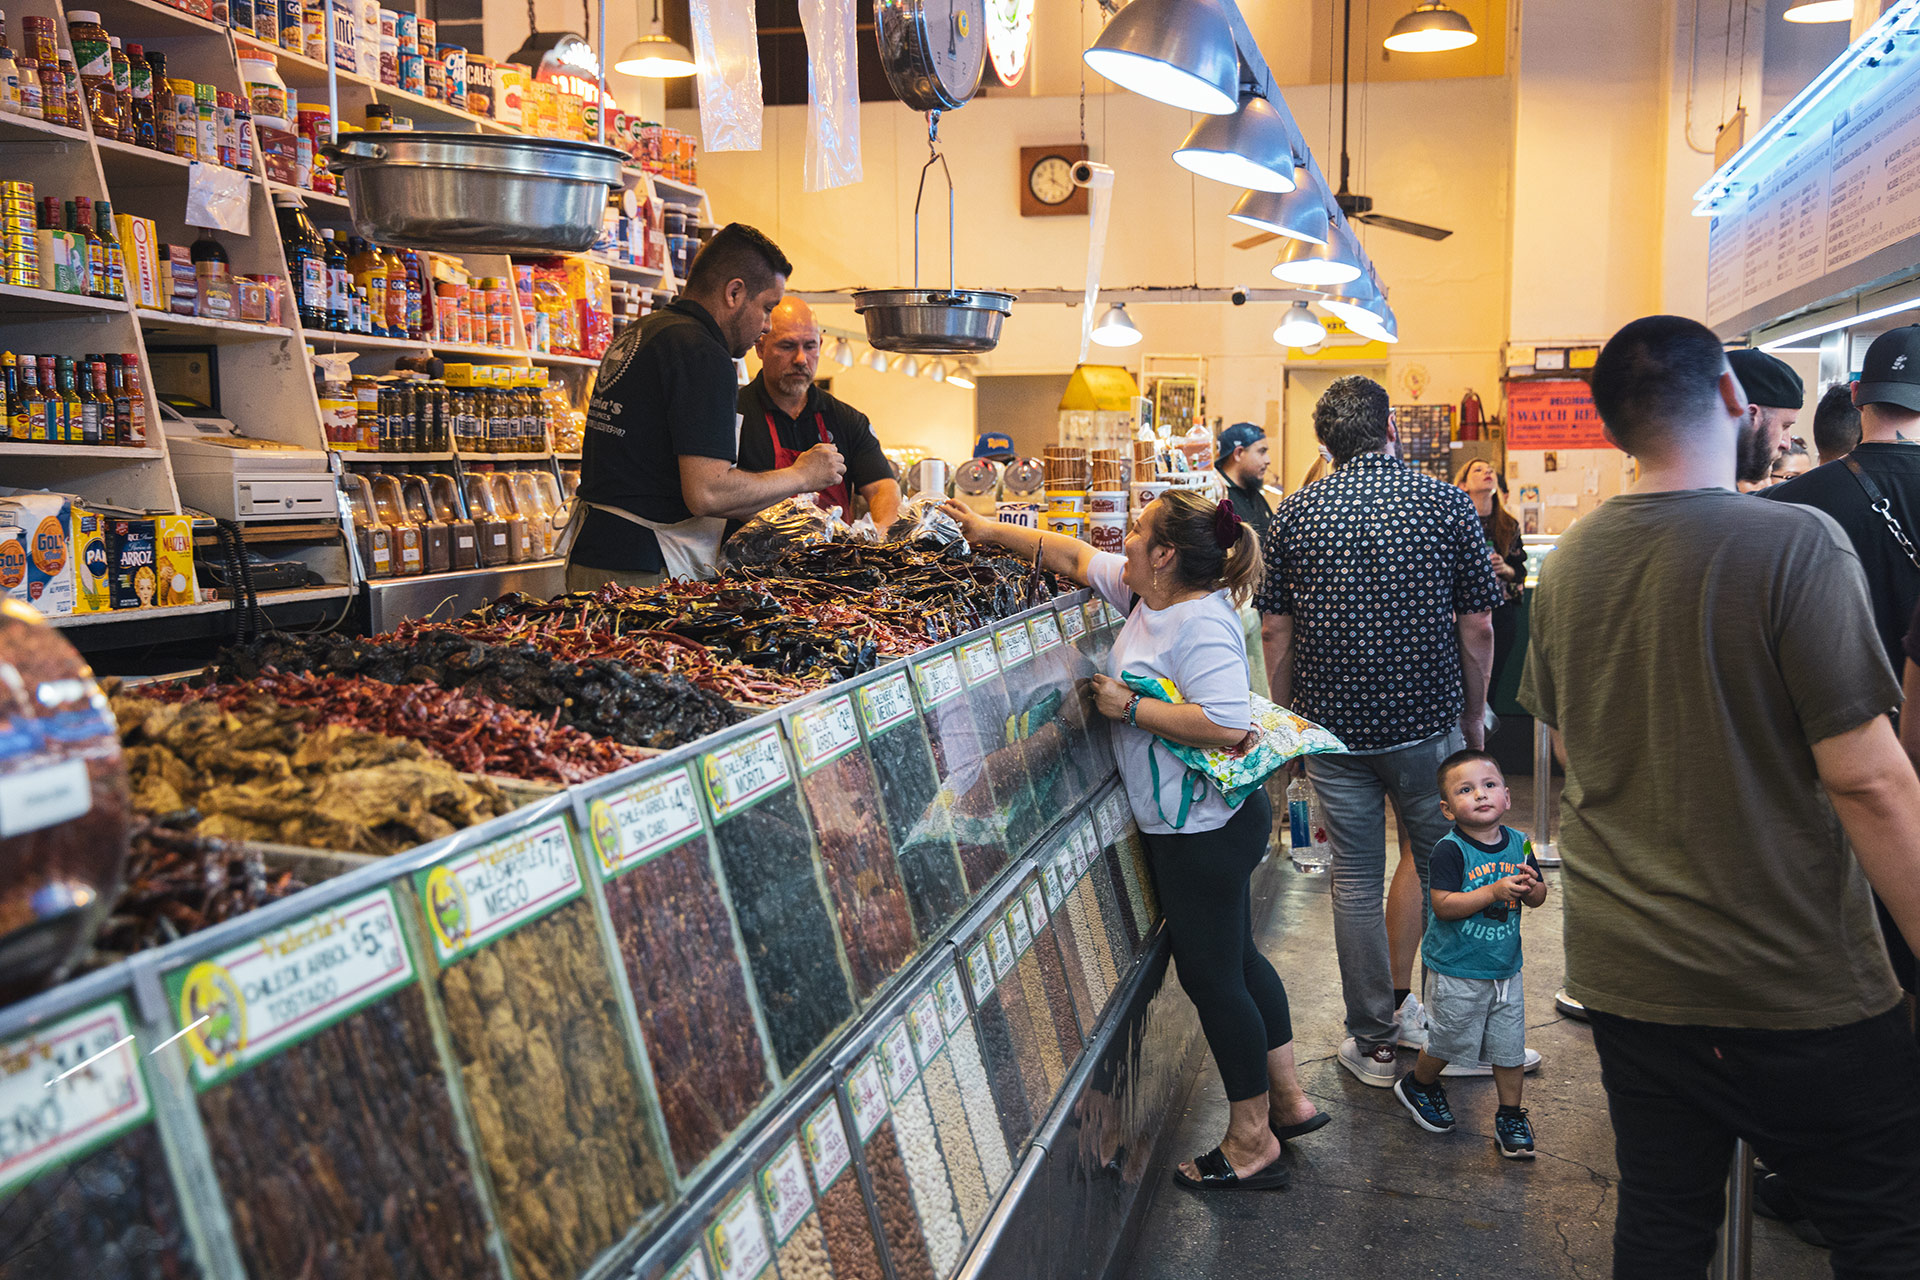 Grand Central Market DTLA: Family Grocery Shopping